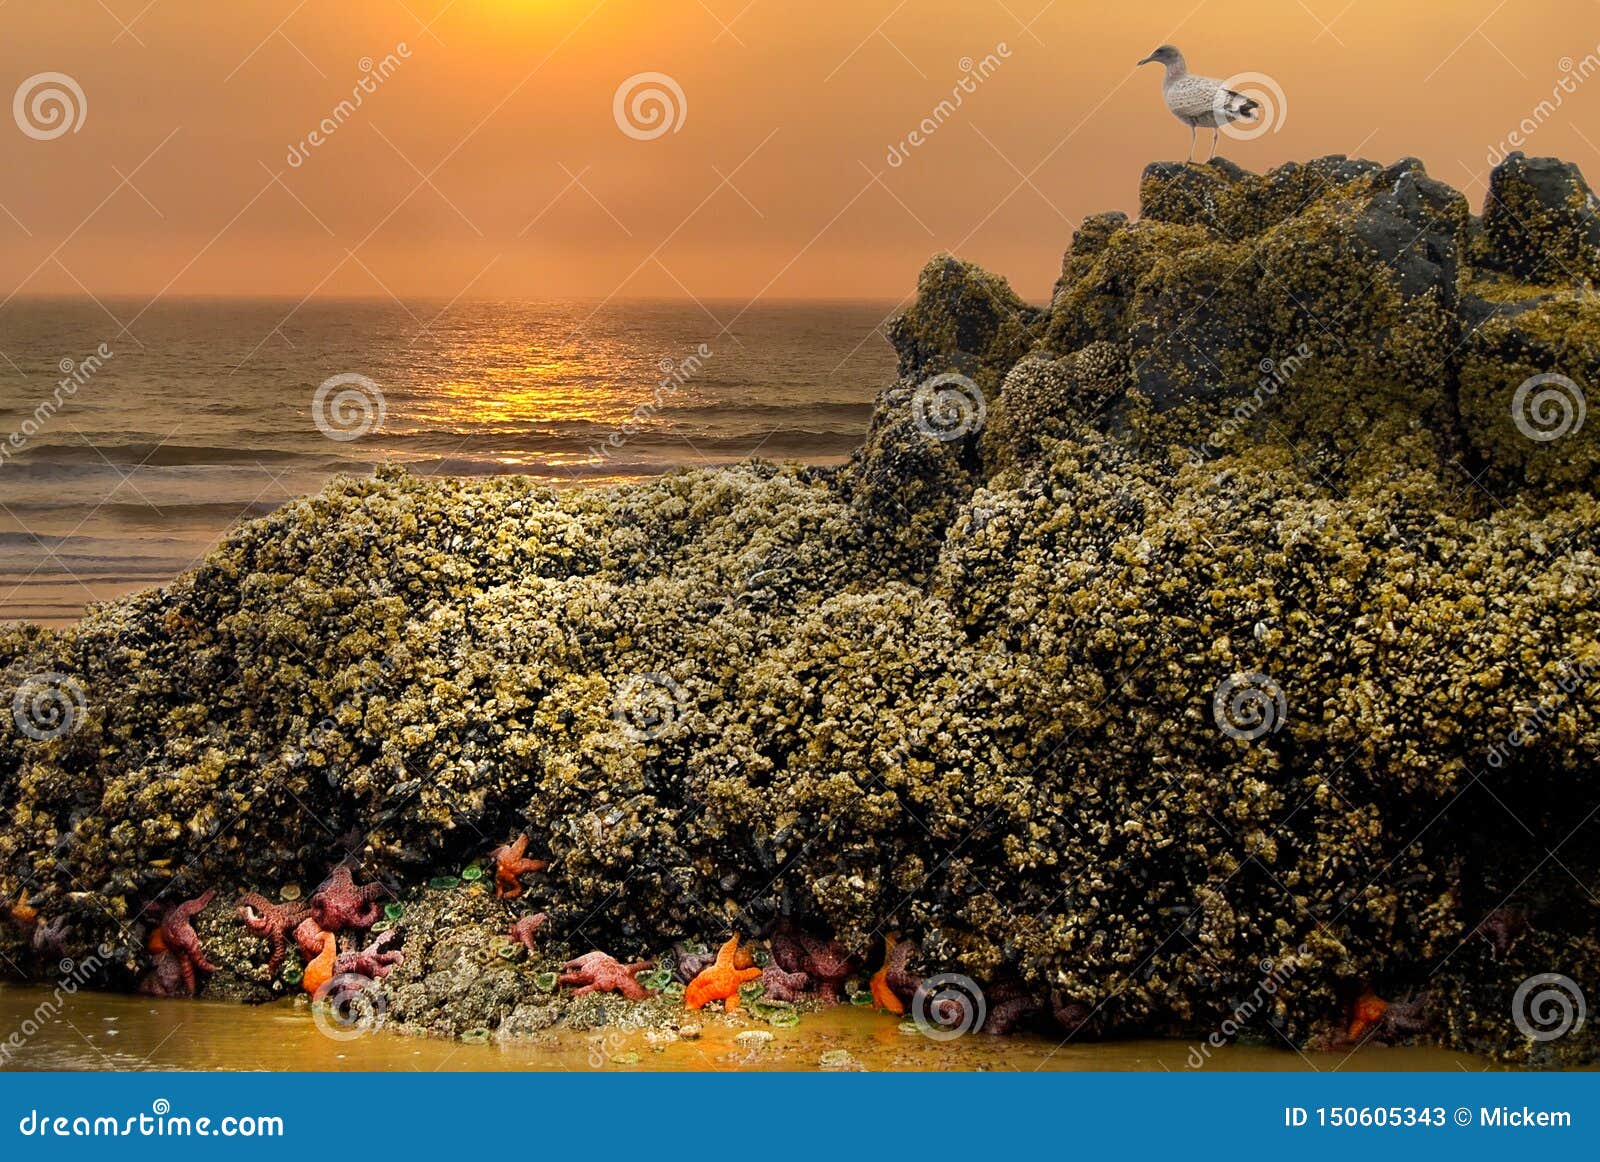 Person fishing on cliff catches starfish by calm sea at sunset